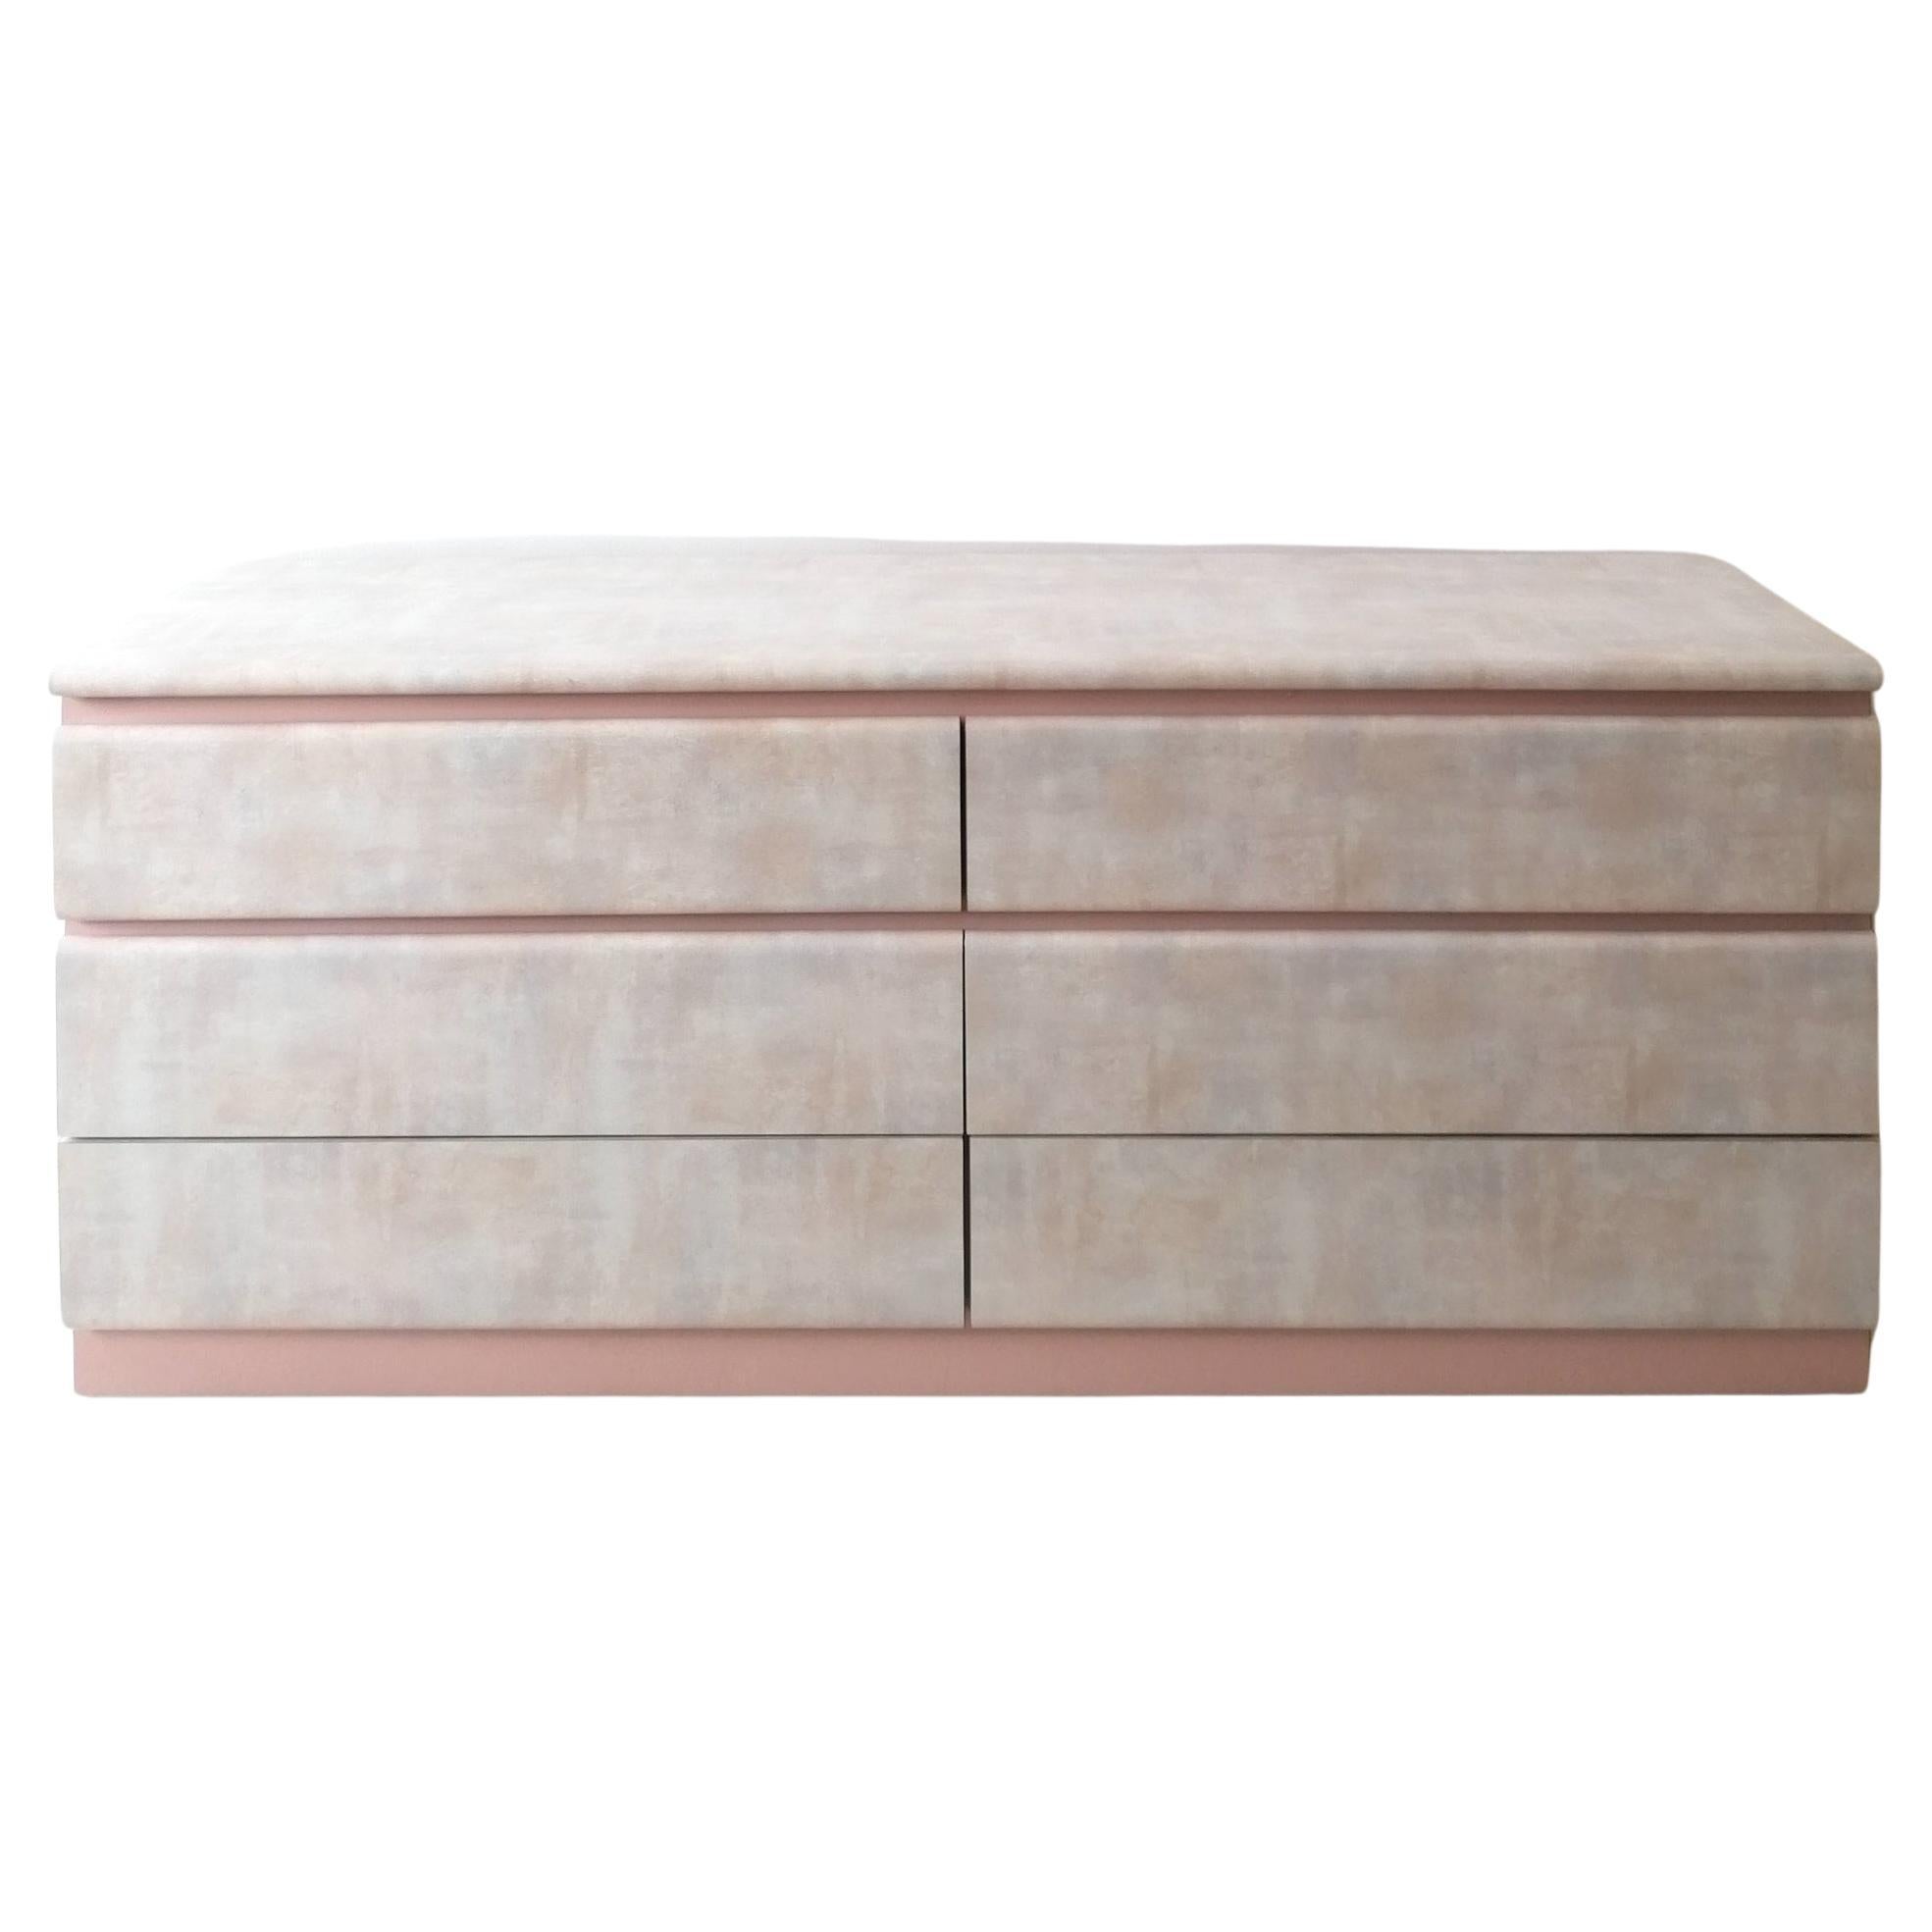 Vintage 1980s Watercolour Pastel & Pink Laminate Sideboard with 6 Drawers, USA